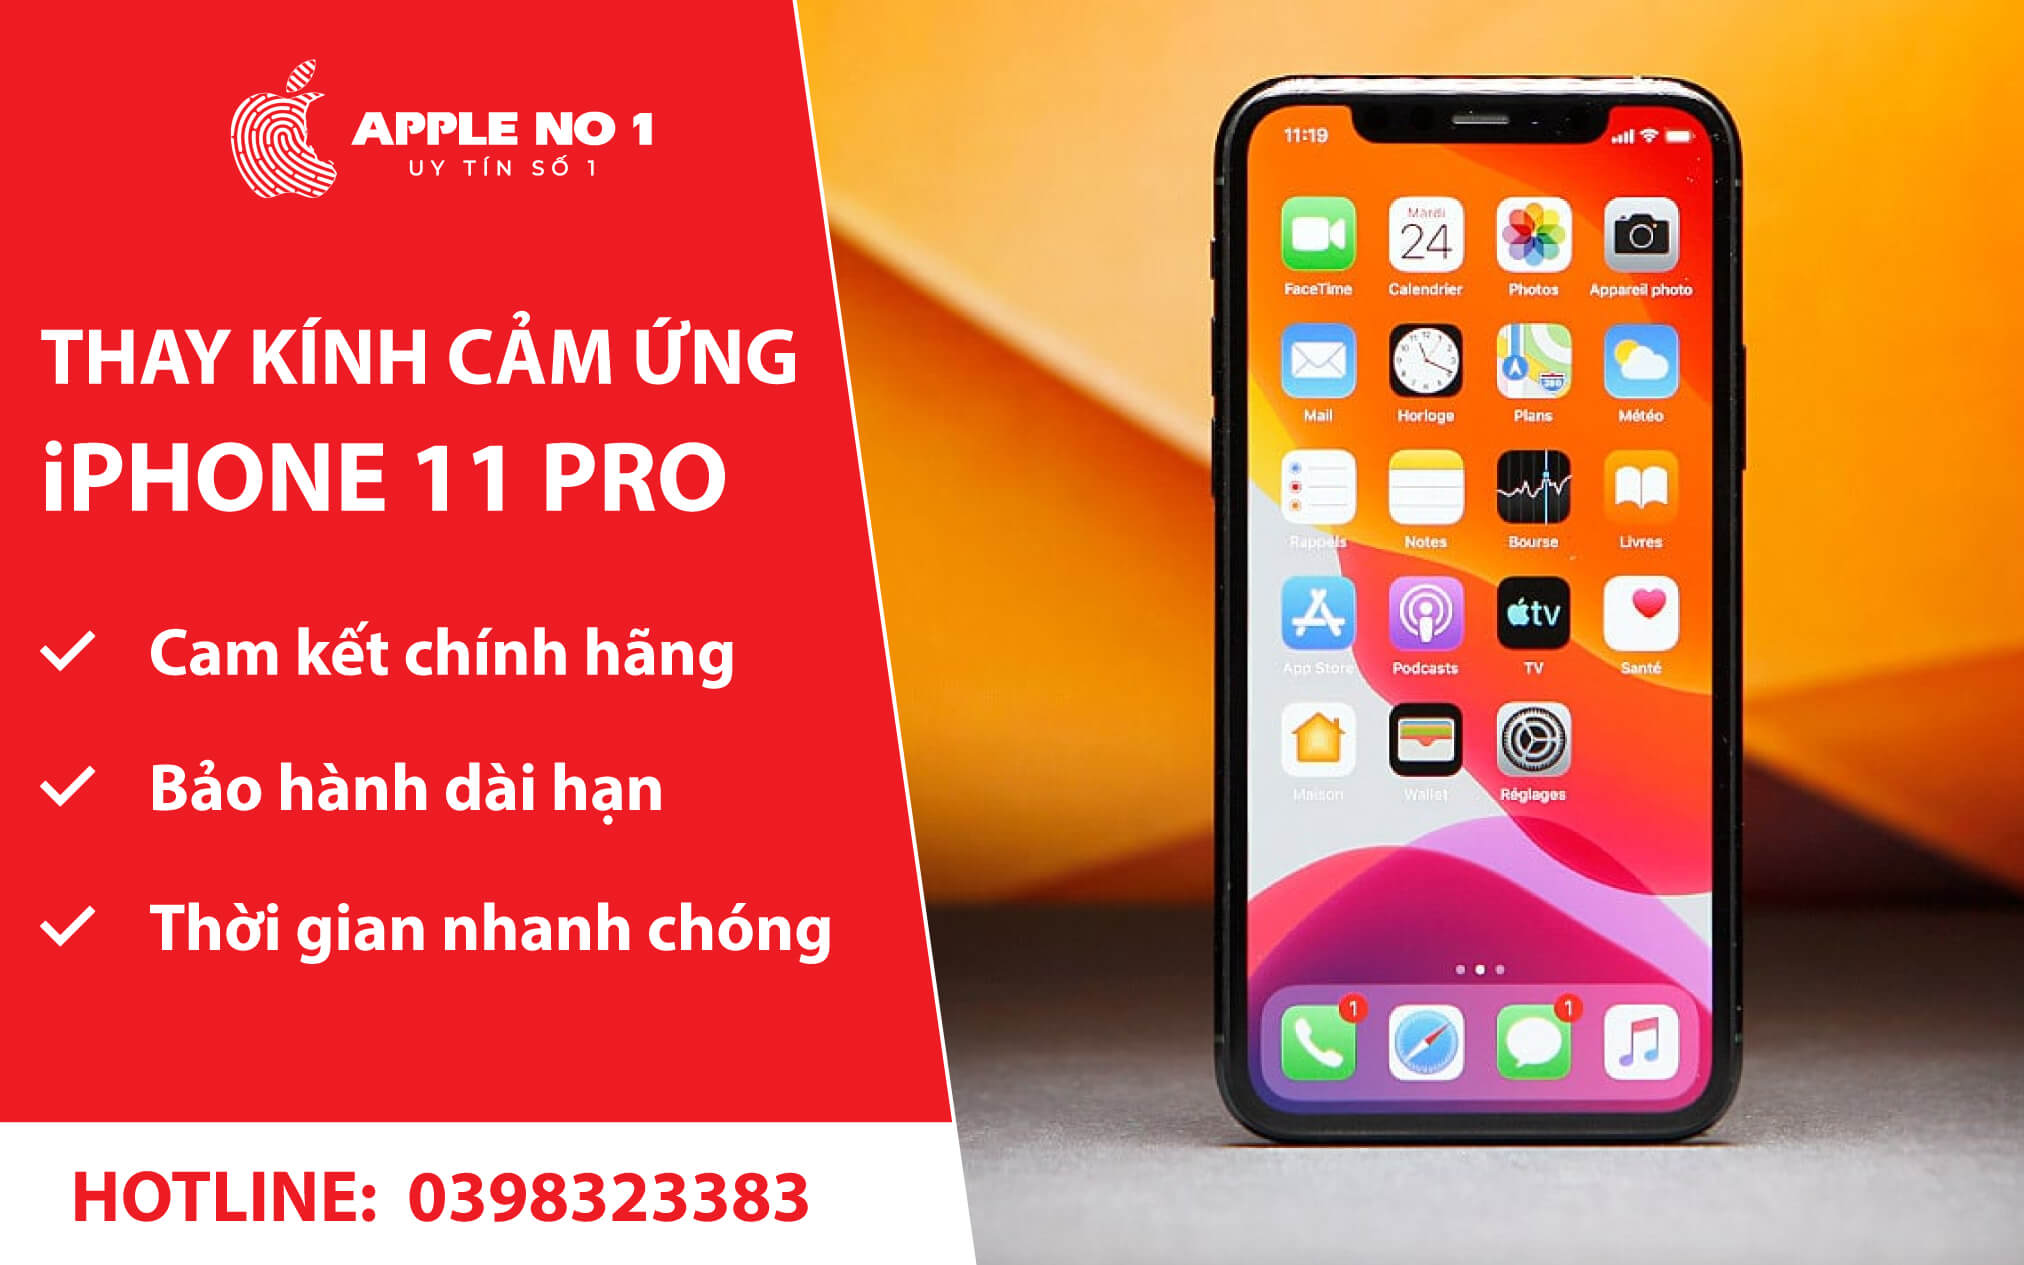 thay kinh cam ung iphone 11 pro gia re, lay ngay tai apple no.1